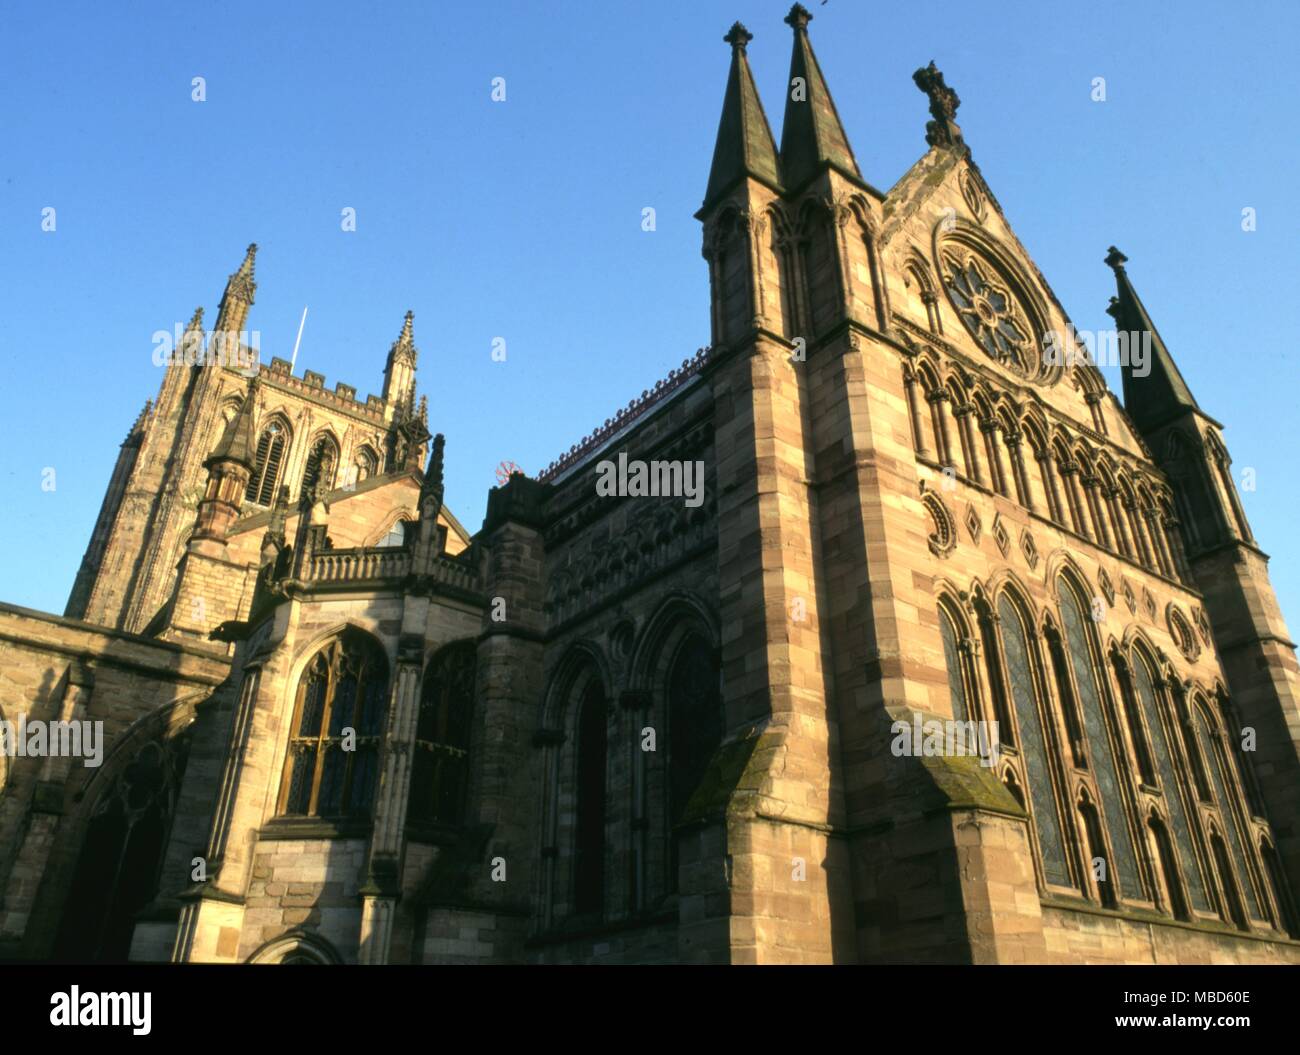 Hereford Cathedral - The cathedral of Hereford from the close, dedicated to SS Mary and Ethelbert, and was founded by King Offa of Mercia, in expiation of the killing of Ethelbert. Present tower, c. 1300 Stock Photo